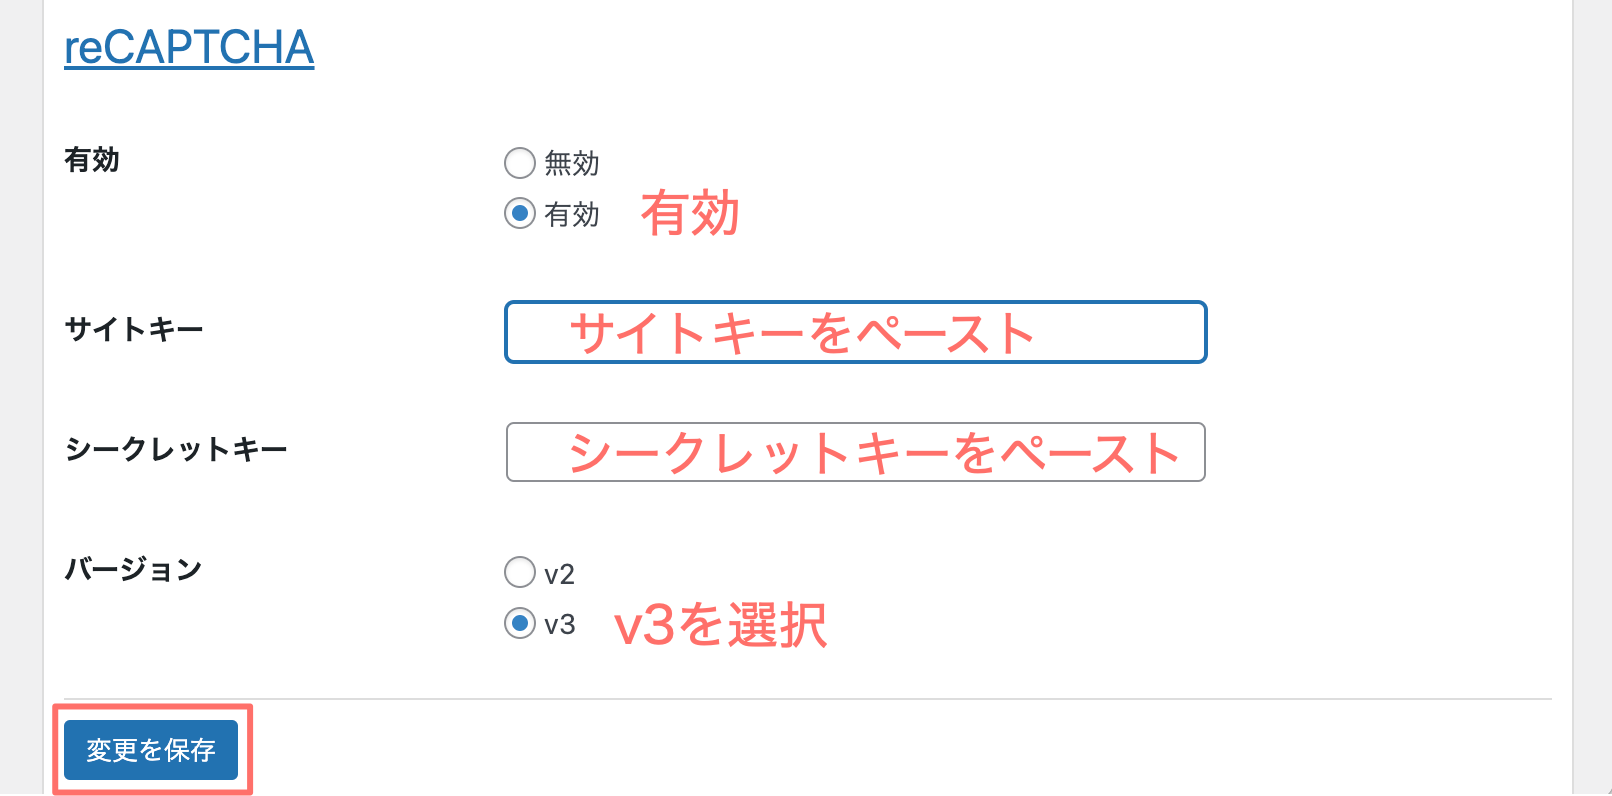 Booking Packageの一般設定詳細画面4（reCAPTCHA）